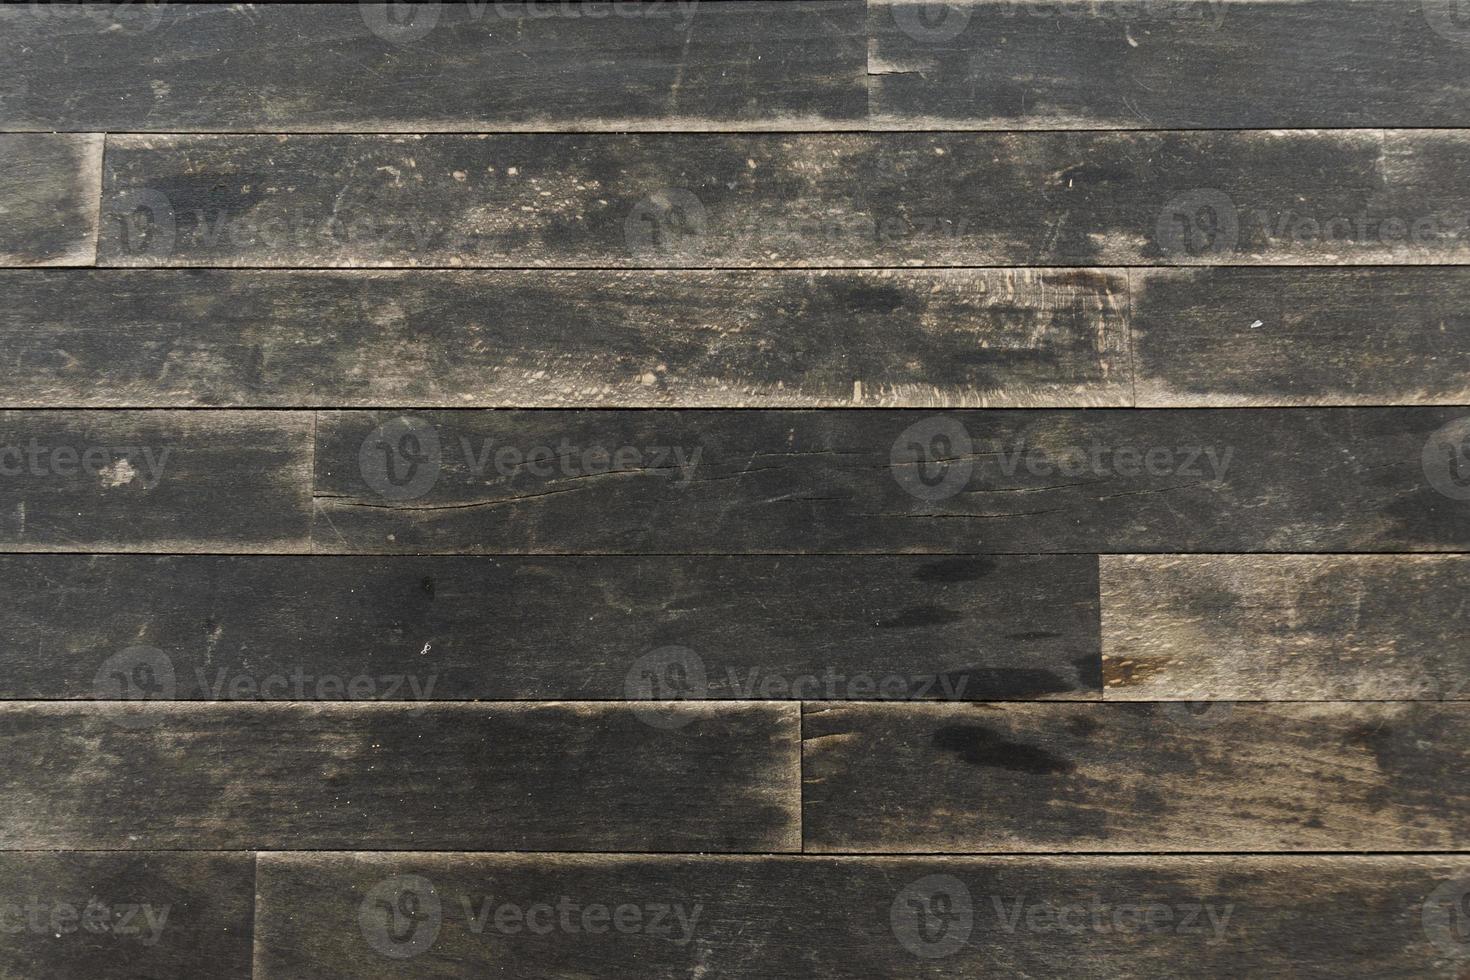 Old wooden floor for background photo